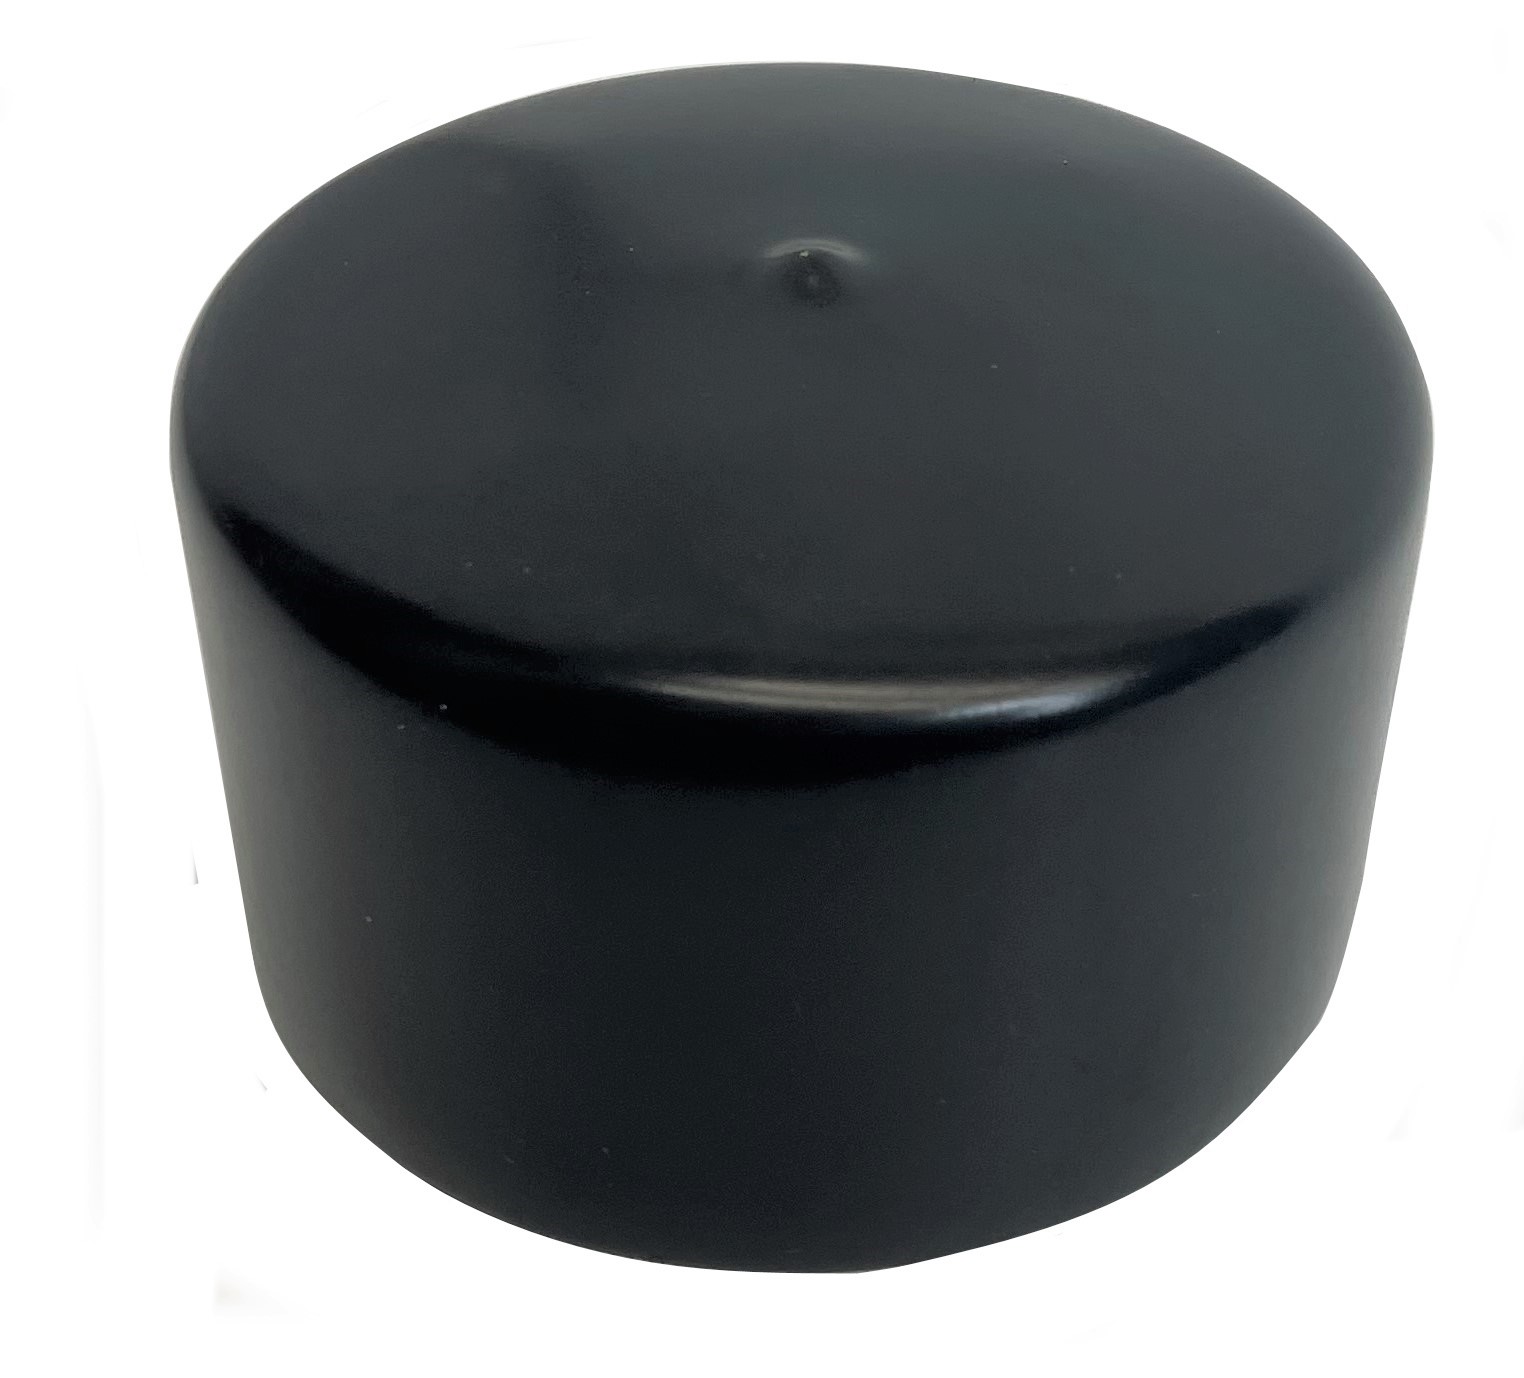 Top Cover for the Telescopic TP-200 Security Post